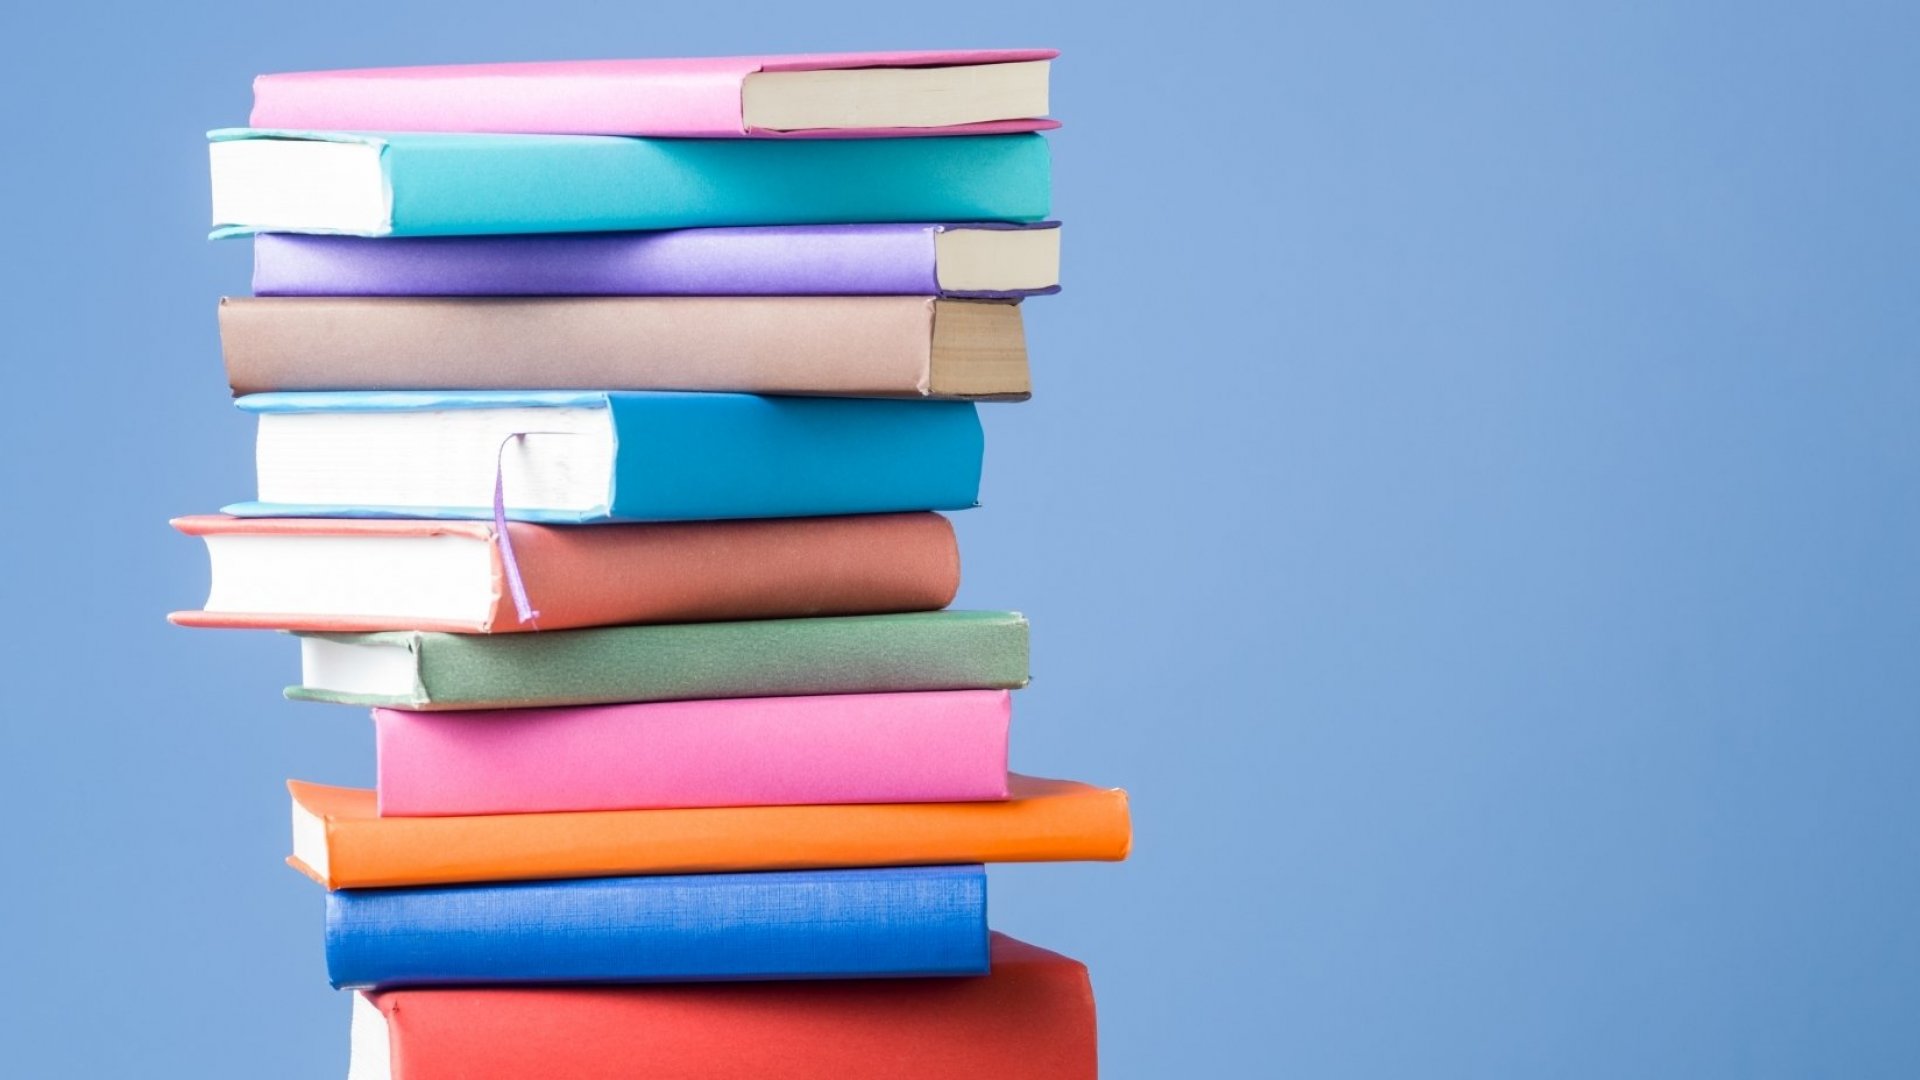 Stack of colorful books with blue background.